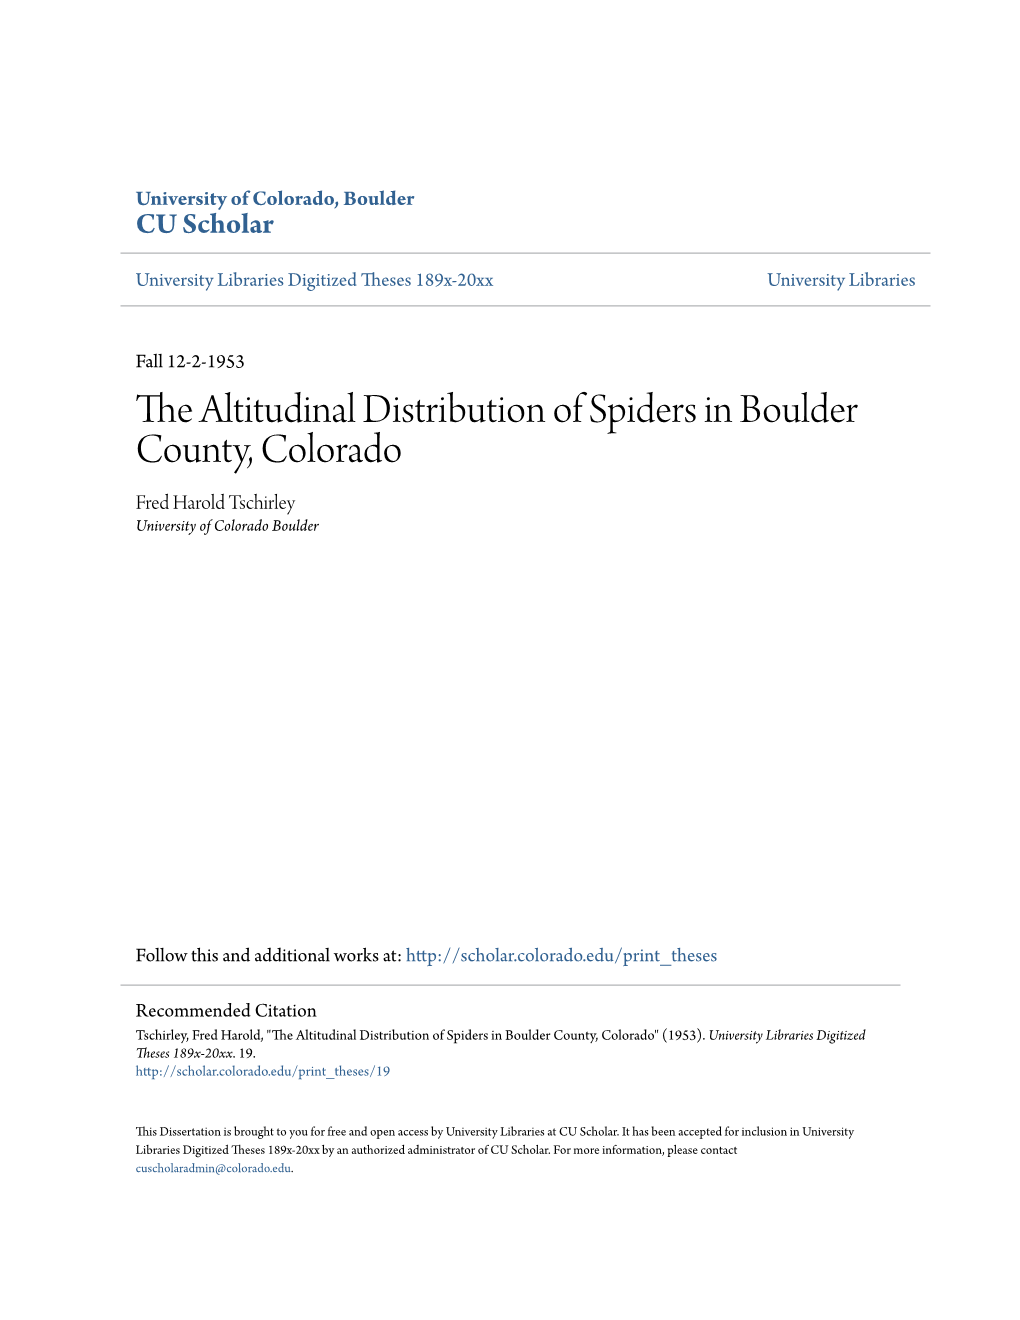 The Altitudinal Distribution of Spiders in Boulder County, Colorado Fred Harold Tschirley University of Colorado Boulder